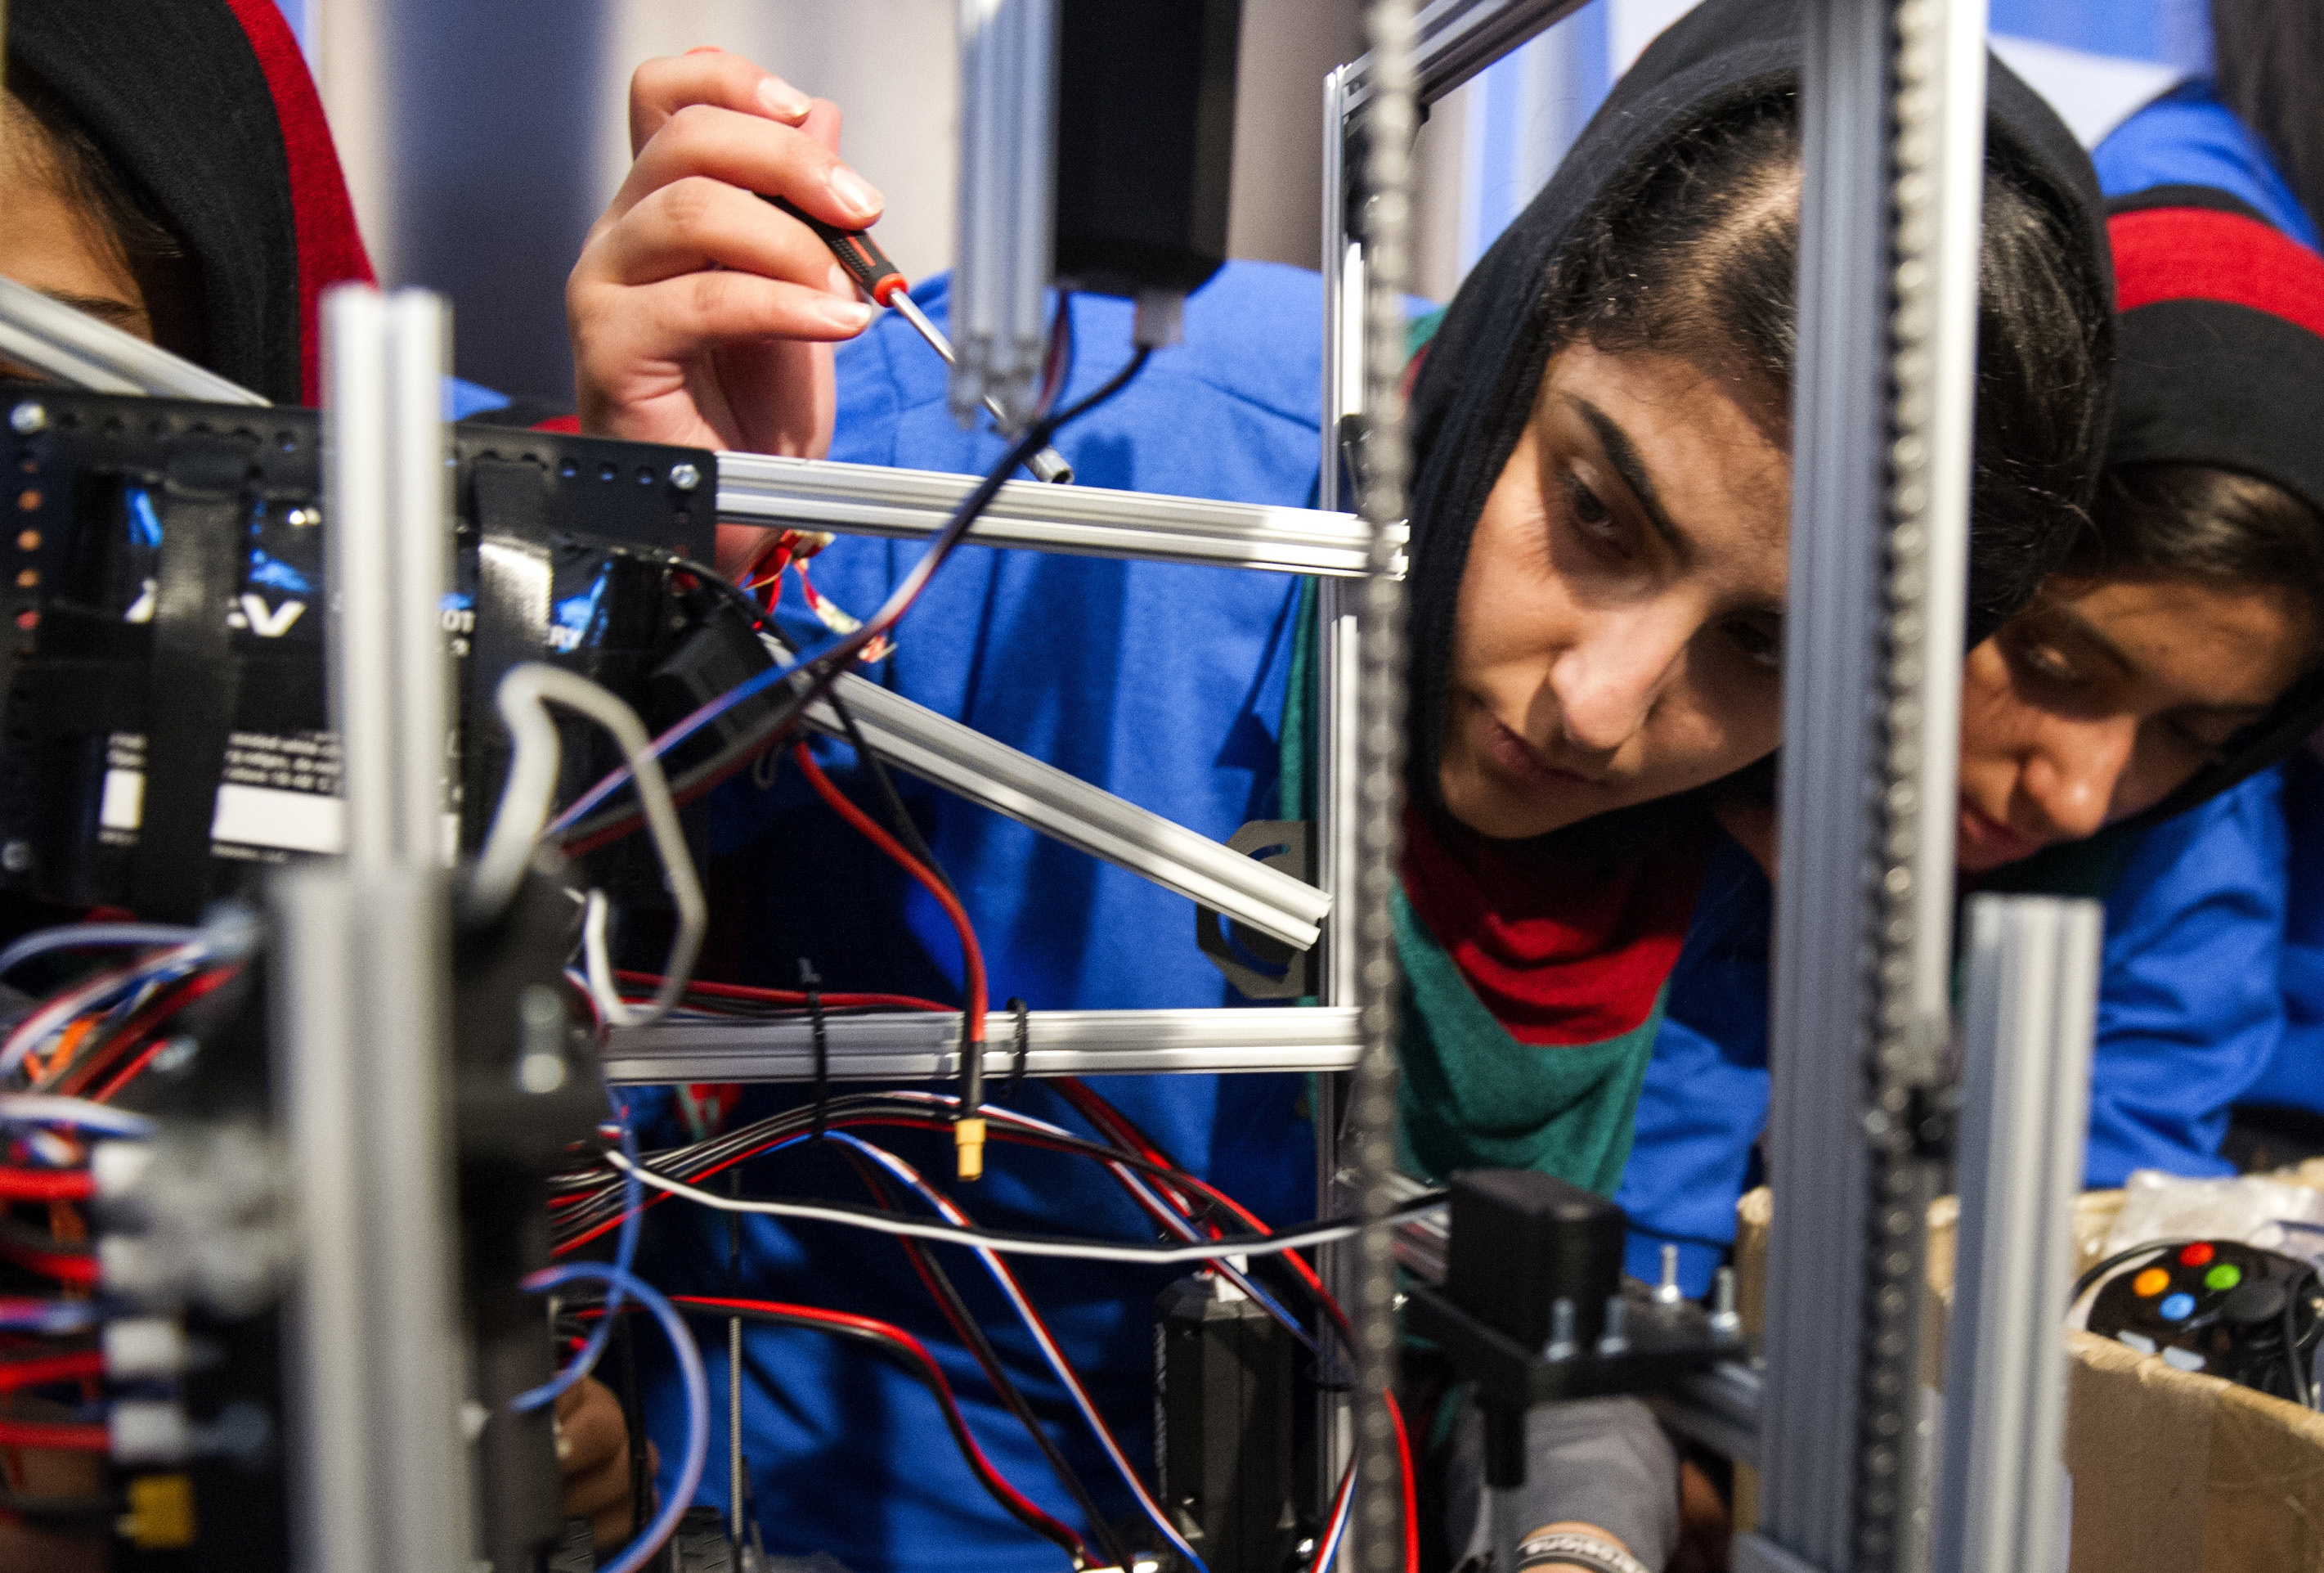 Afghanistan team member Lisa Azizi troubleshoots the team's robot entry prior to the opening ceremony for the FIRST Global Challenge in Washington, Sunday, July 16, 2017. They will be competing against entrants from more than 150 countries in the international competition. It's the first annual robotics competition designed to encourage youths to pursue careers in math and science. (AP Photo/Cliff Owen)